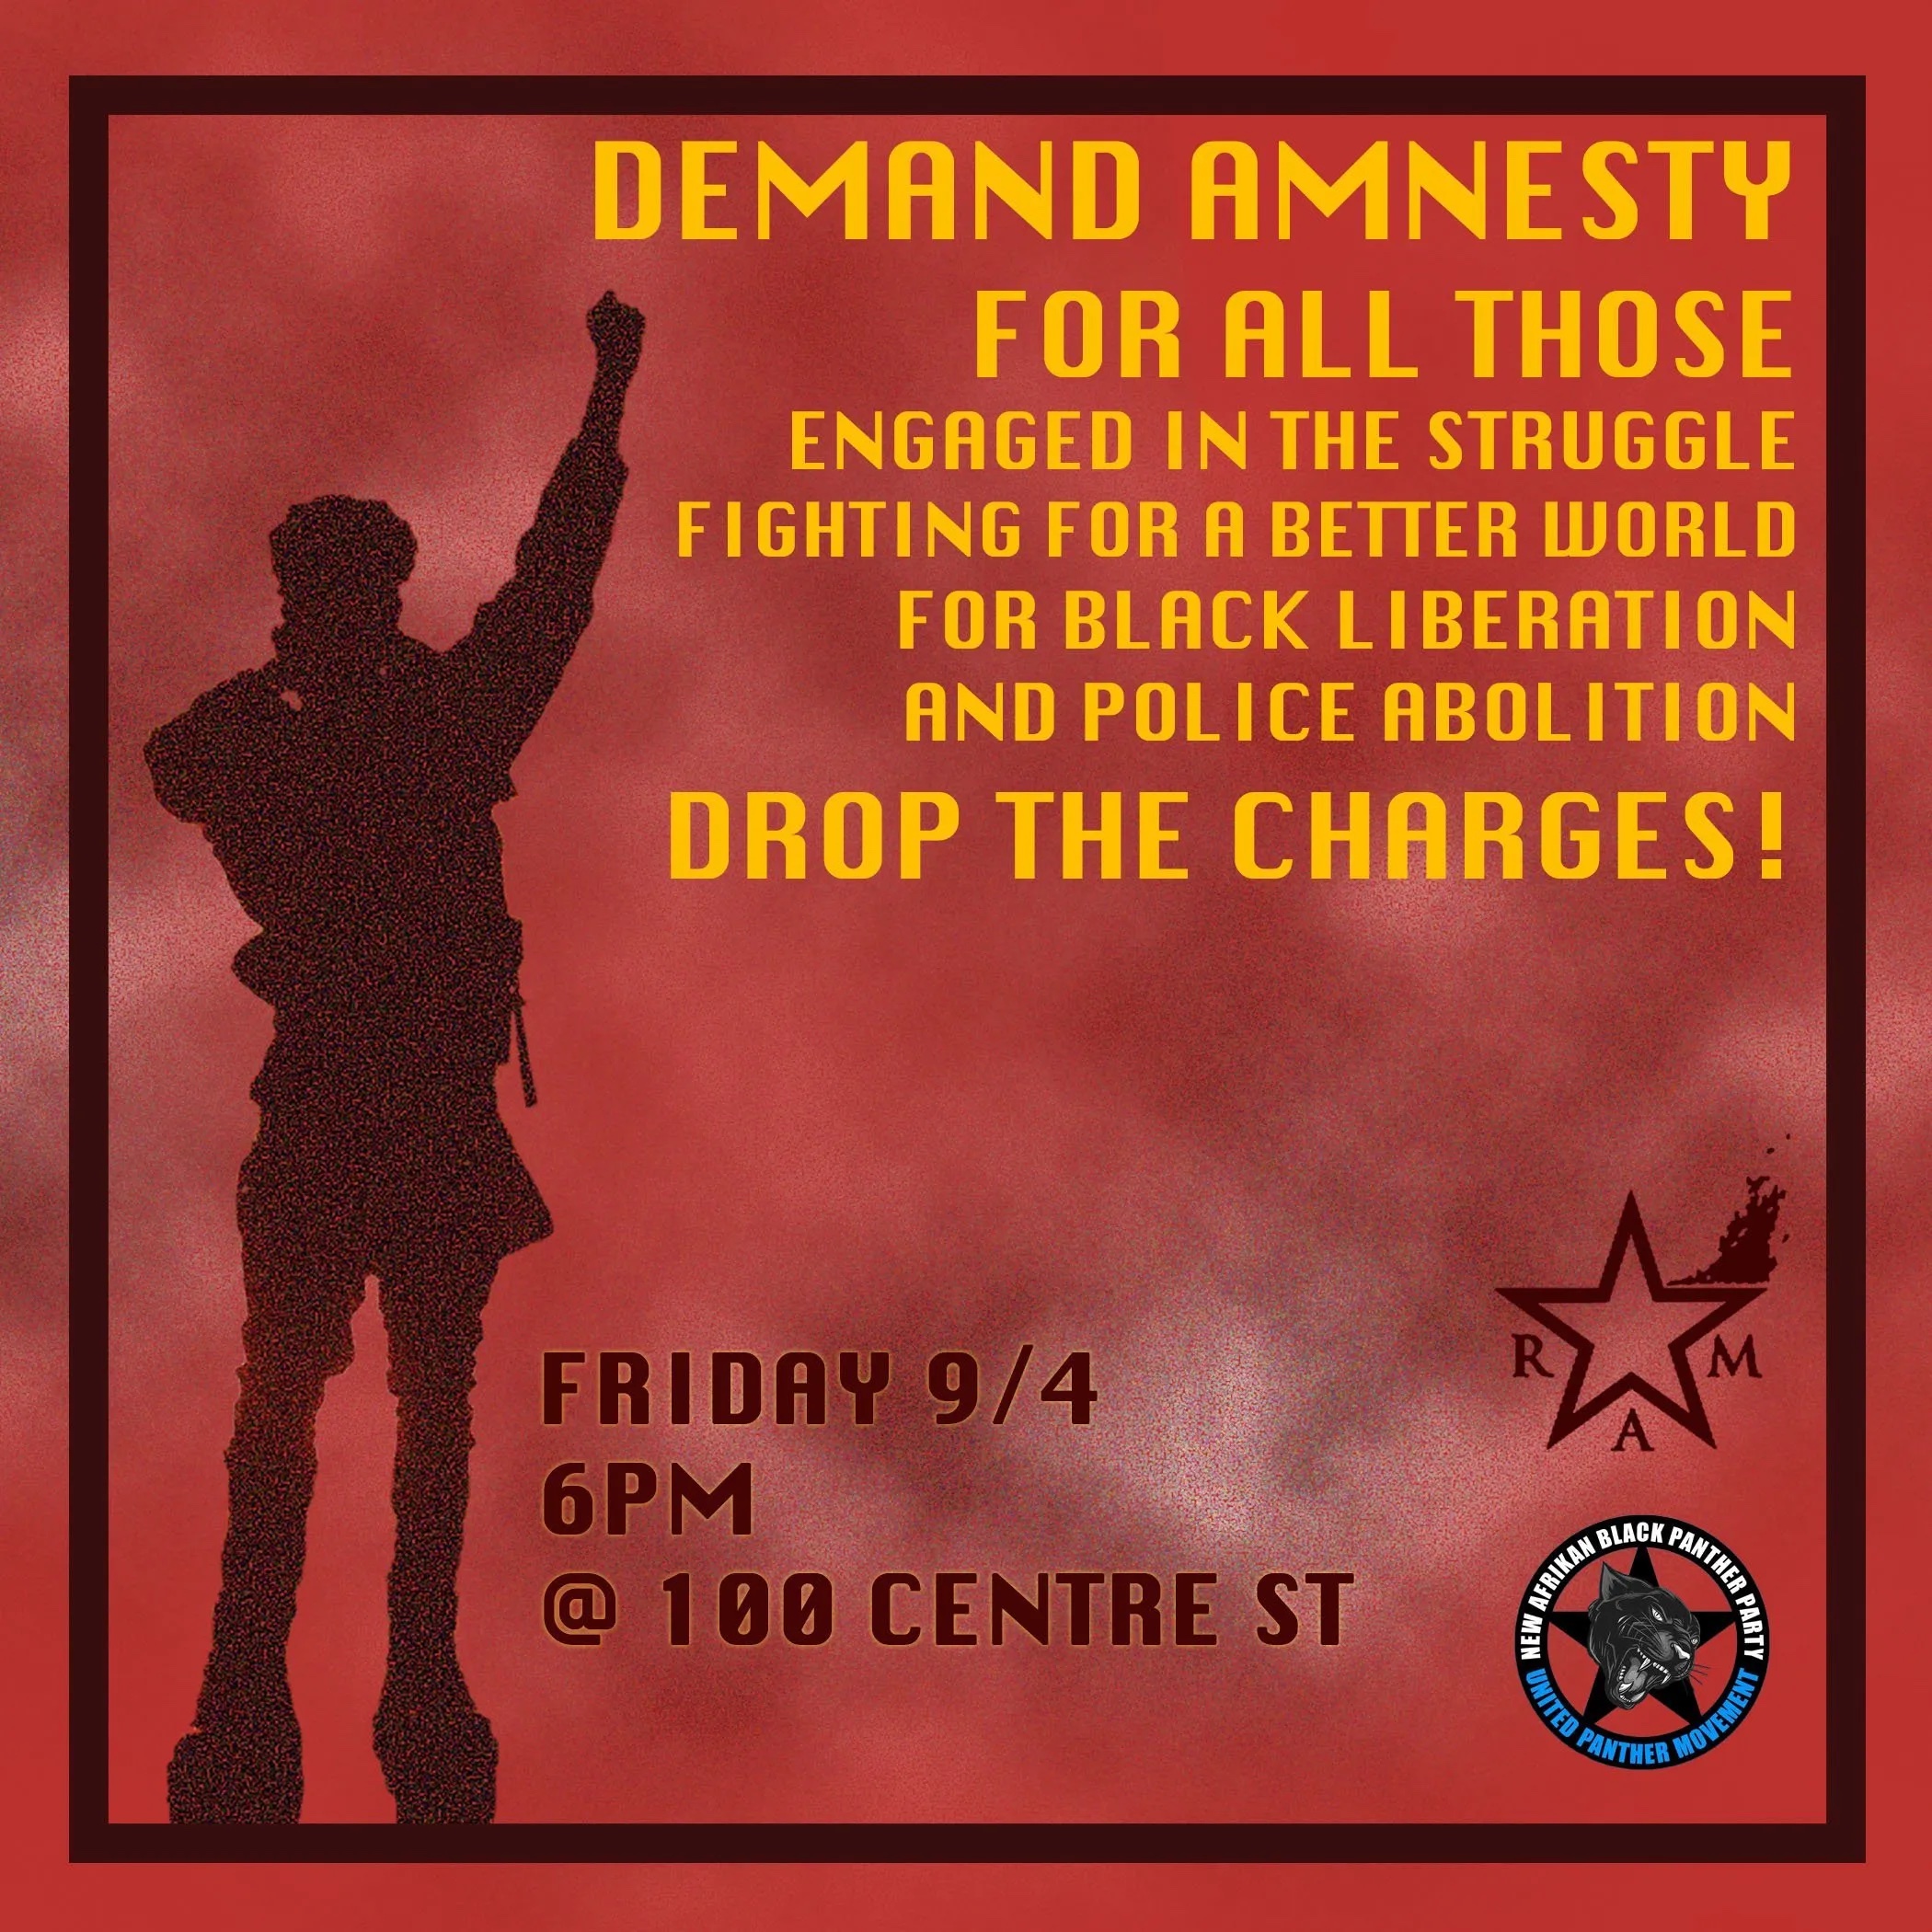 RAM & New Afrikan Black Panther Party Rally in #NYC: Demand Amnesty for All Arrested During the Uprising